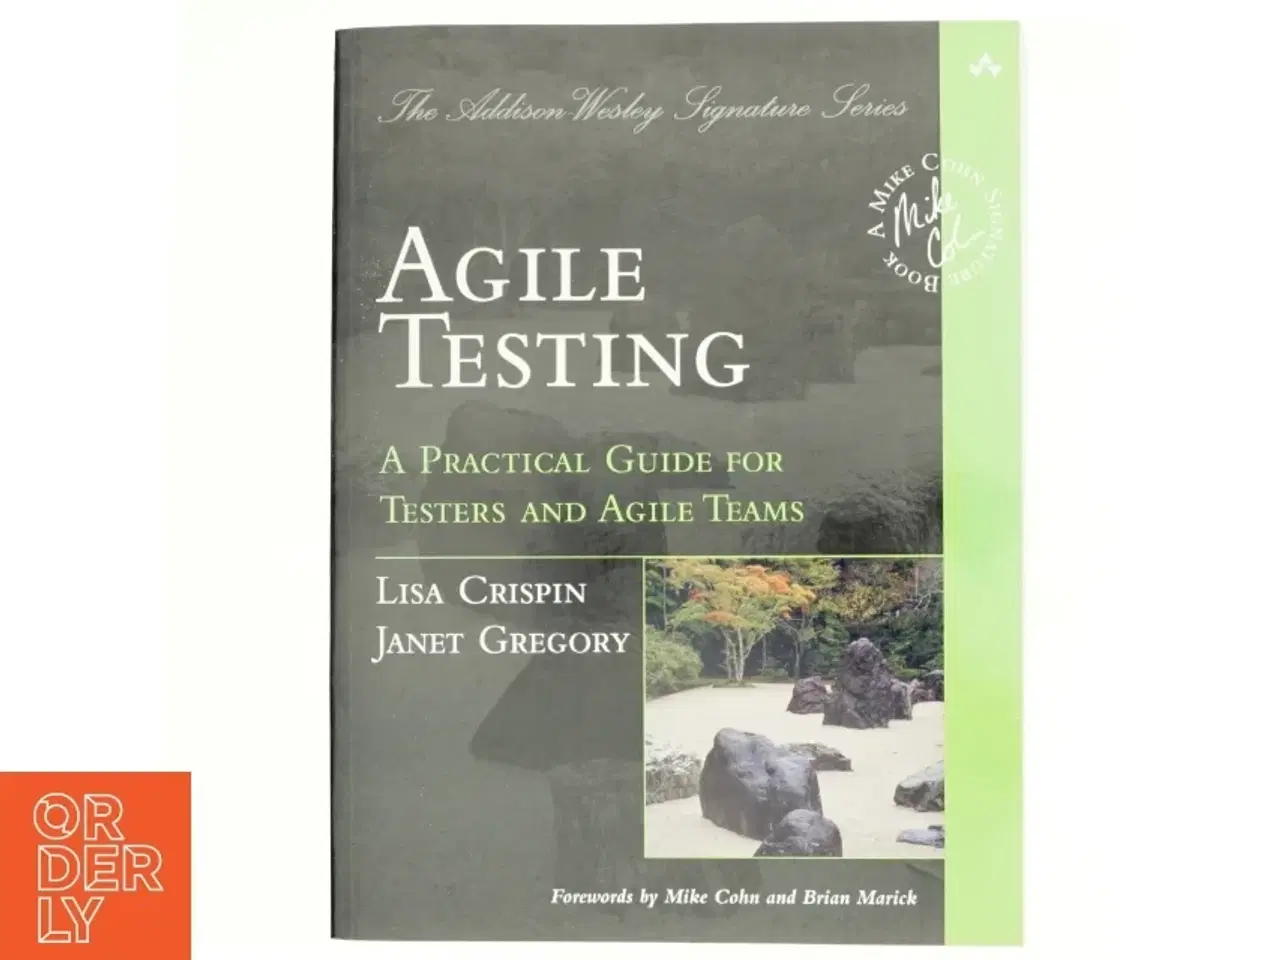 Billede 1 - Agile testing : a practical guide for testers and agile teams (Bog)